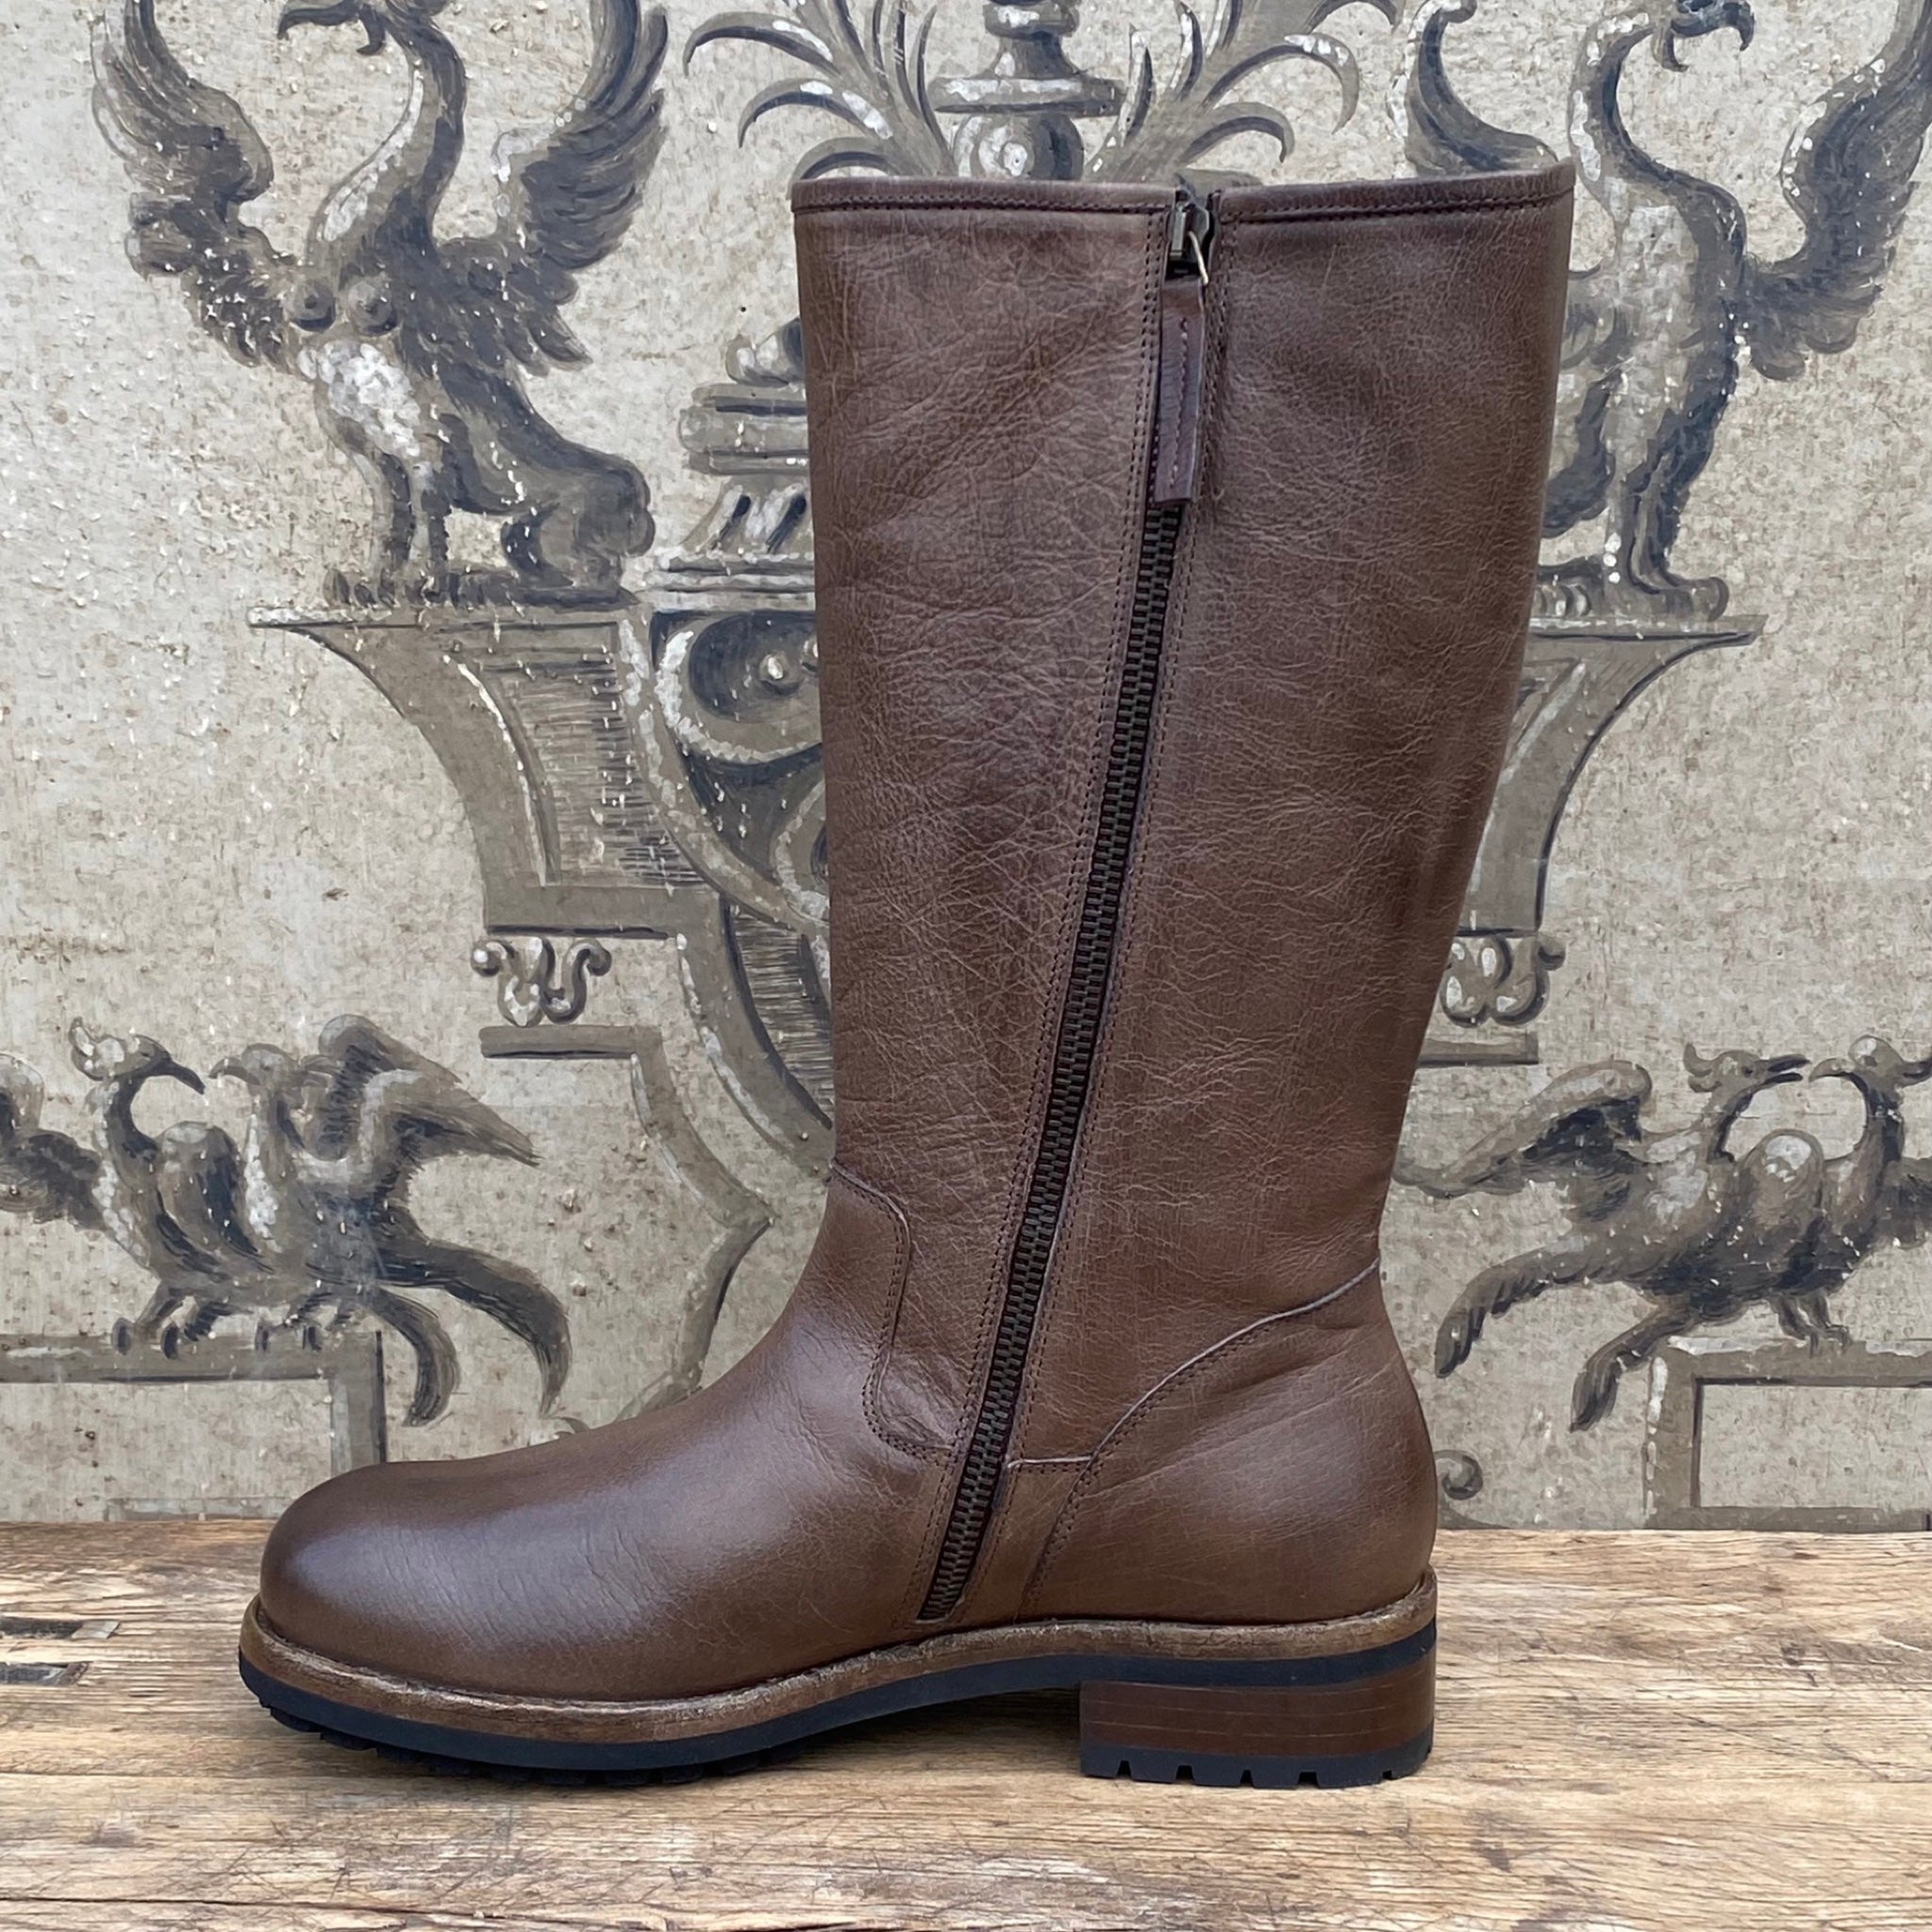 Victoria Varrasso Buffalo Leather Land Boots